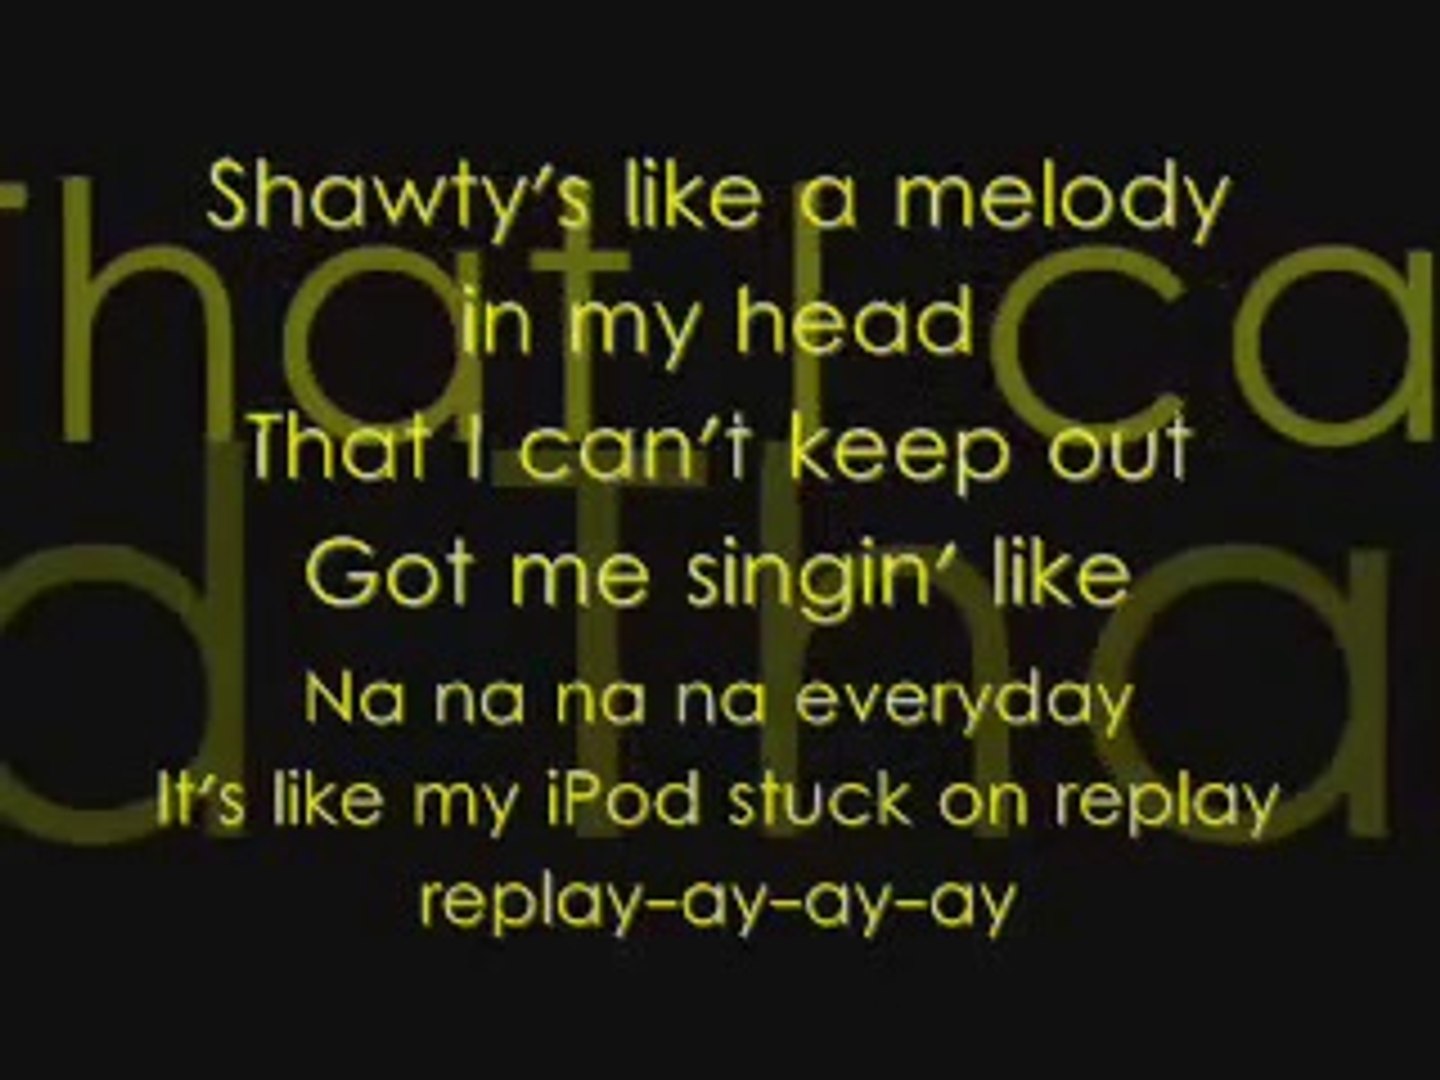 Replay - Iyaz Shawty's Like A Melody (cover)